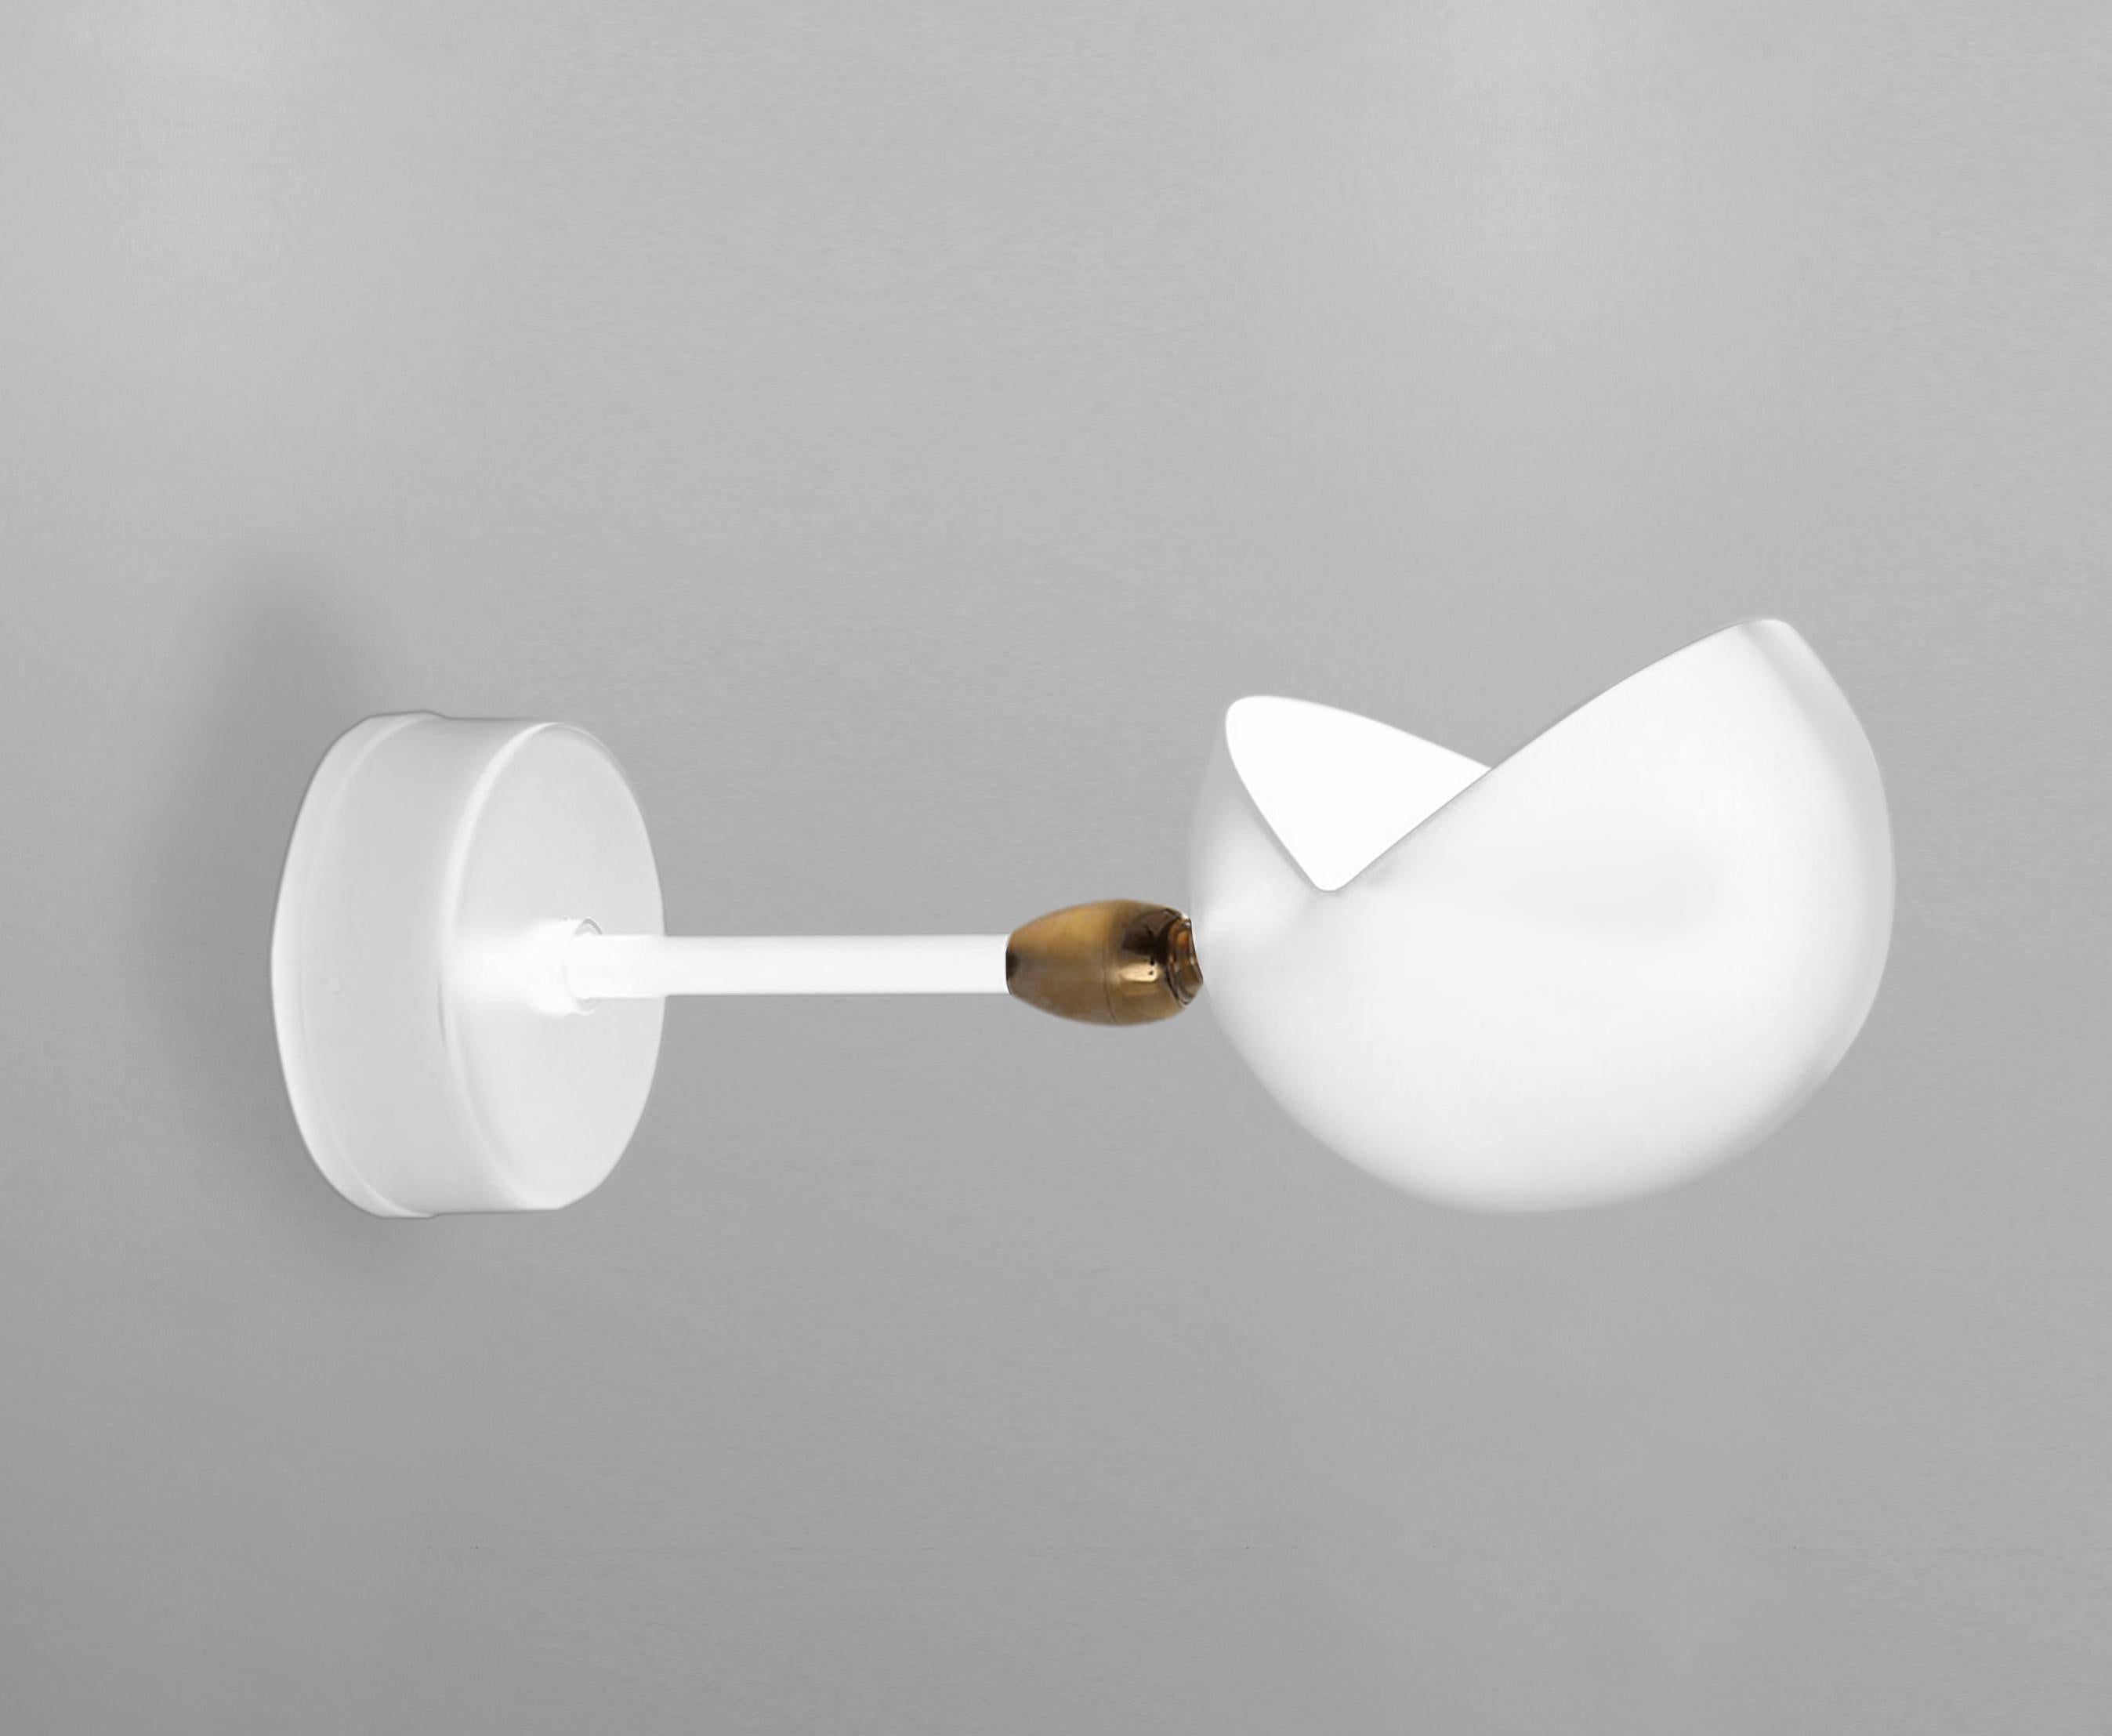 Sconce wall lamp model 'Eye Wall Lamp' designed by Serge Mouille in 1956.

Manufactured by Editions Serge Mouille in France. The production of lamps, wall lights and floor lamps are manufactured using craftsman’s techniques with the same materials